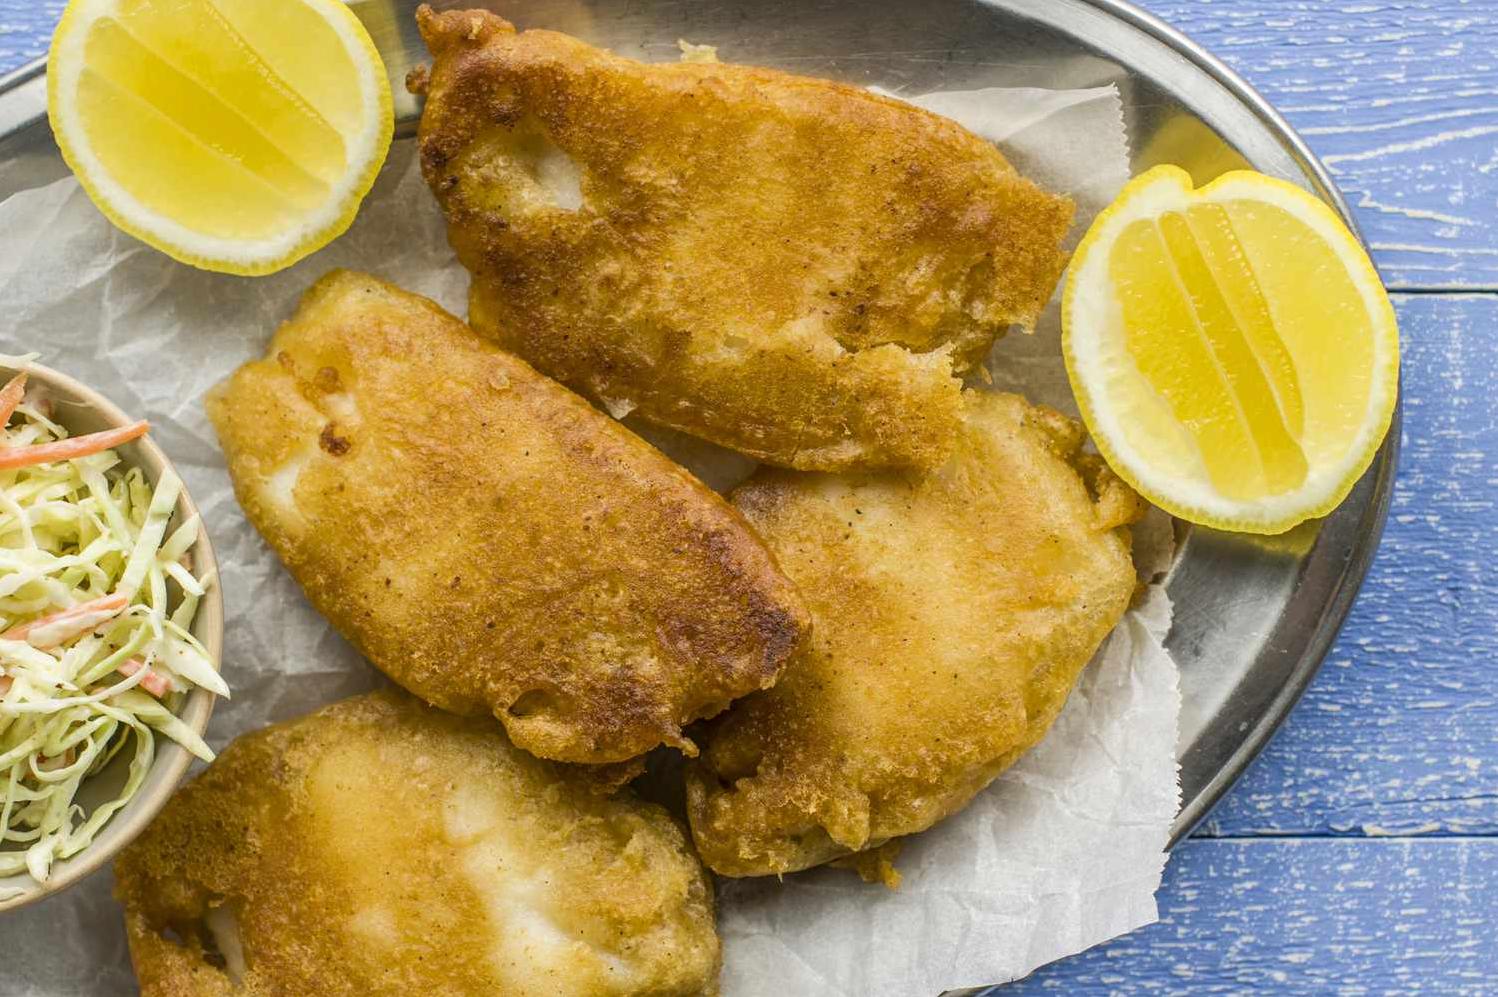  Deliciously gluten-free fish that will make you forget you ever missed gluten.